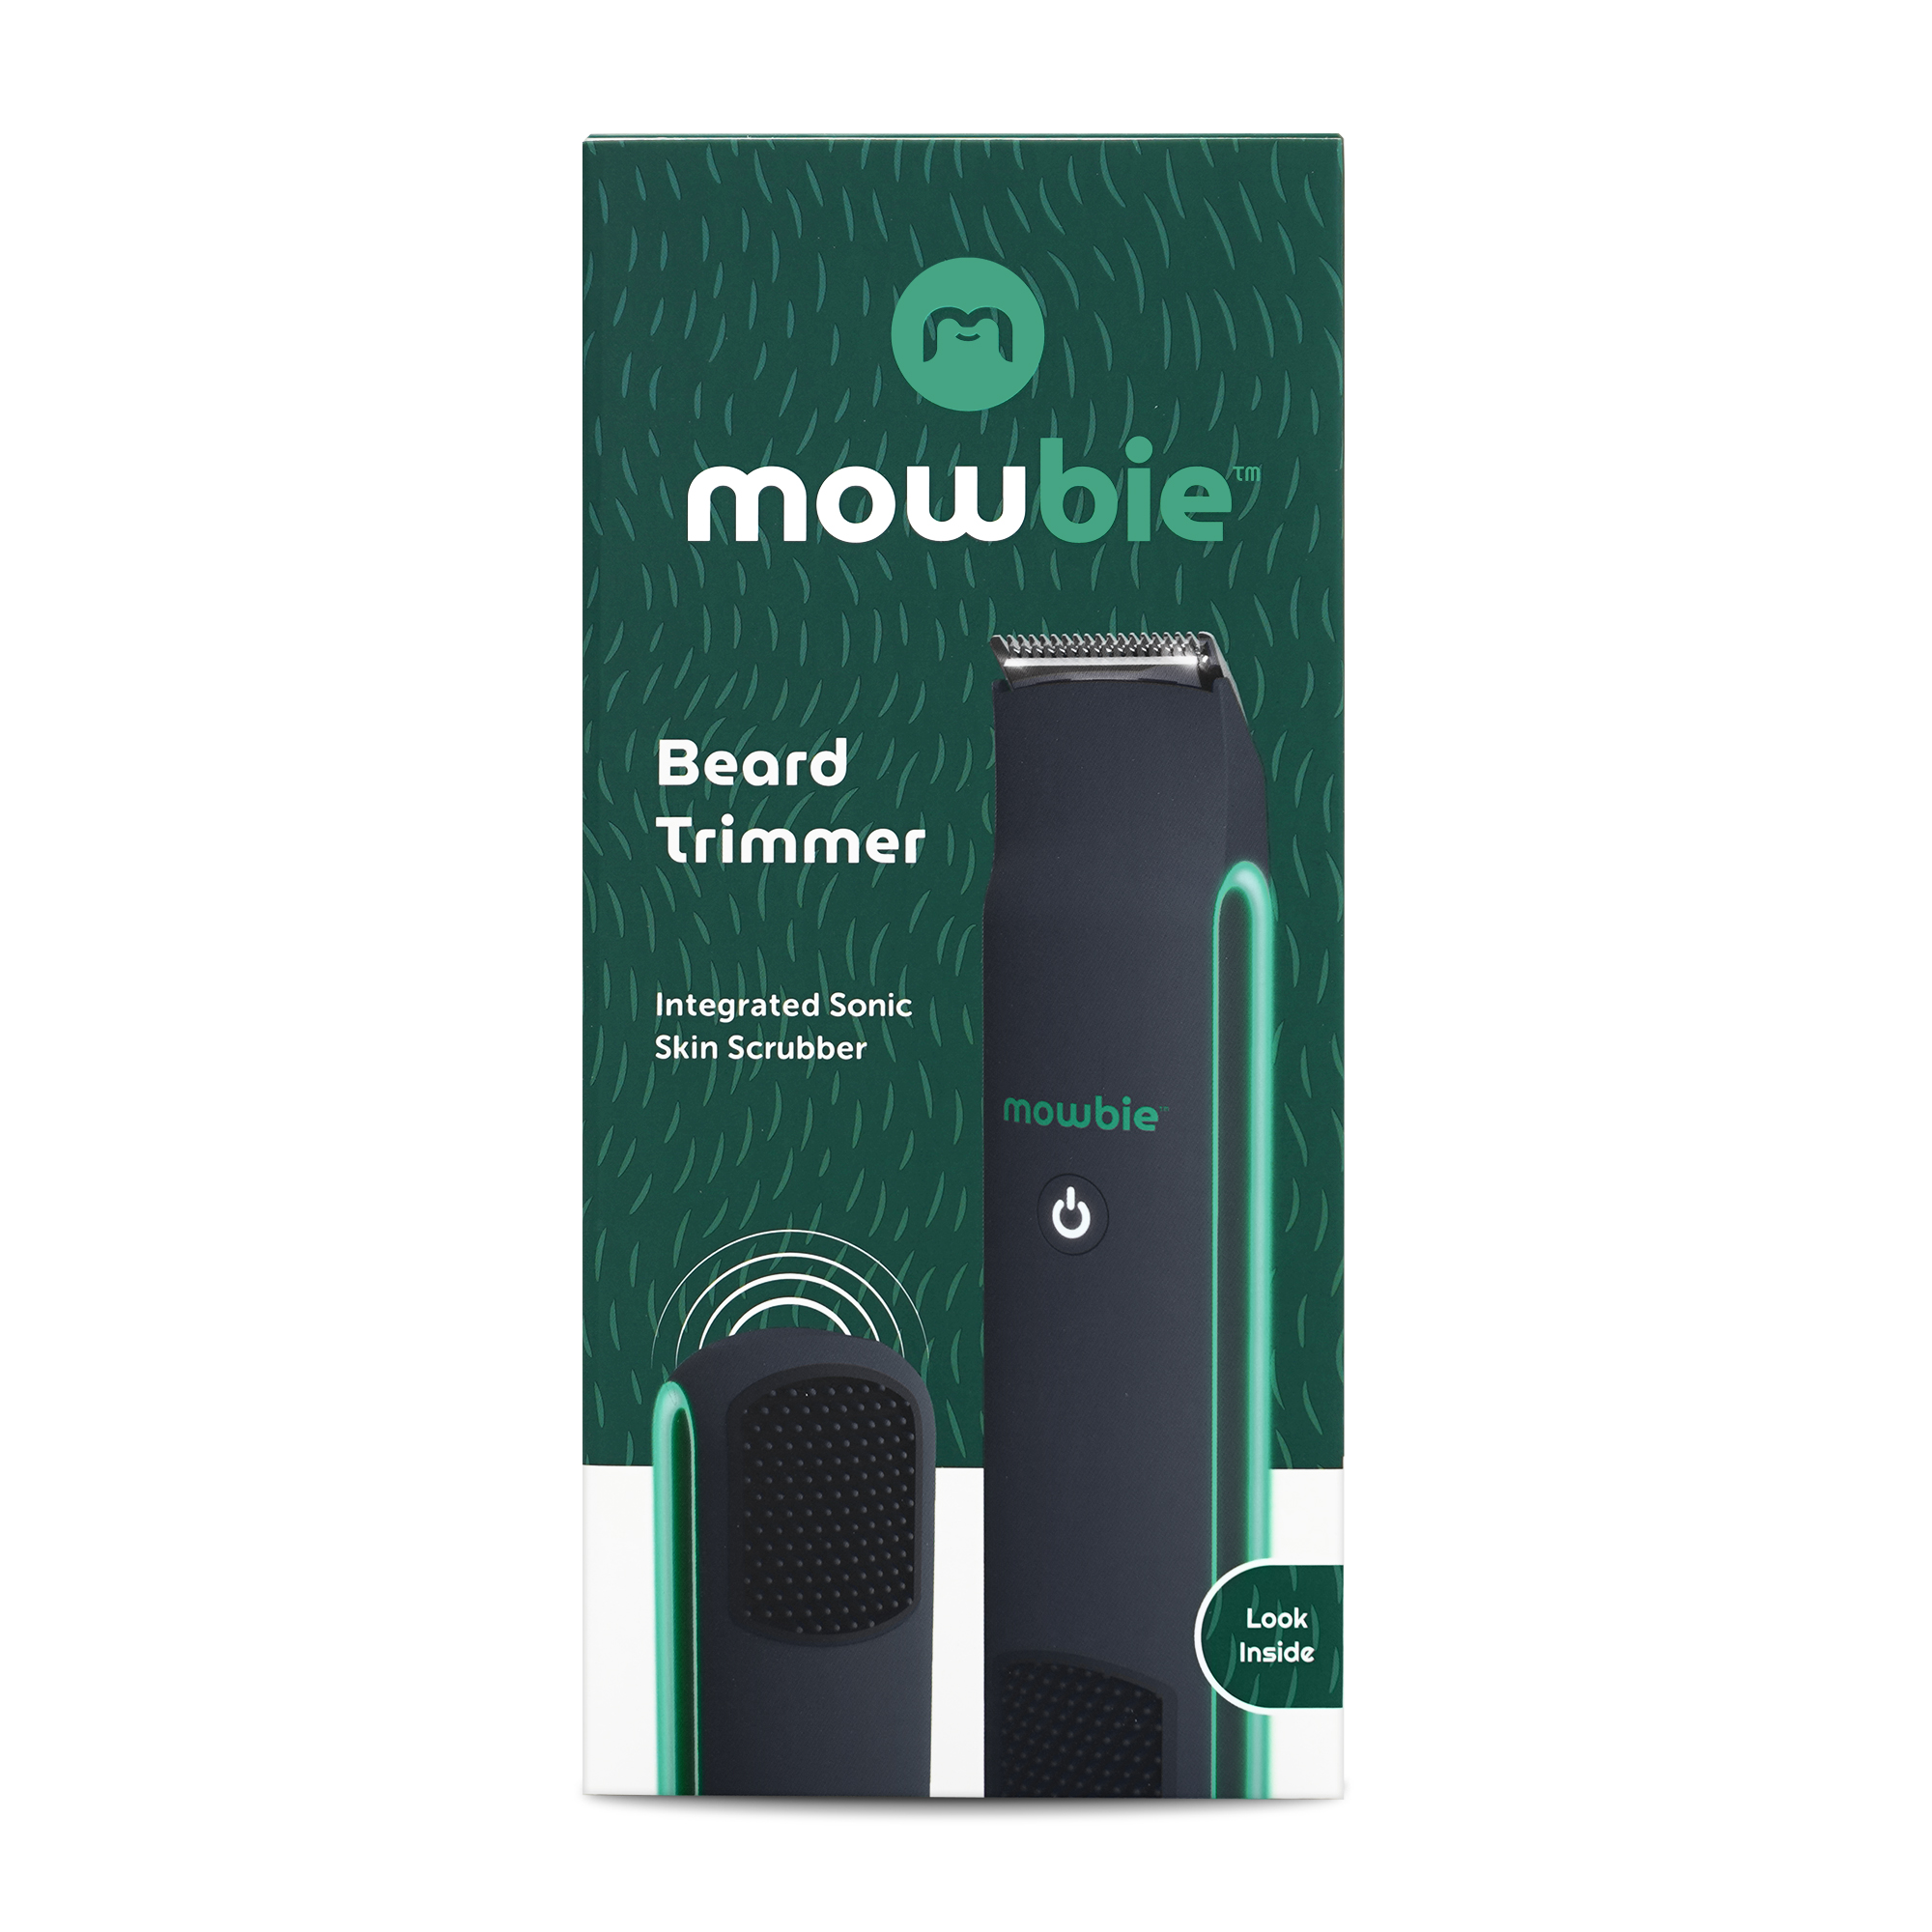 mowbie Beard Trimmer, Male Hair Trimmer & Clipper, Waterproof, Green LED - image 2 of 12